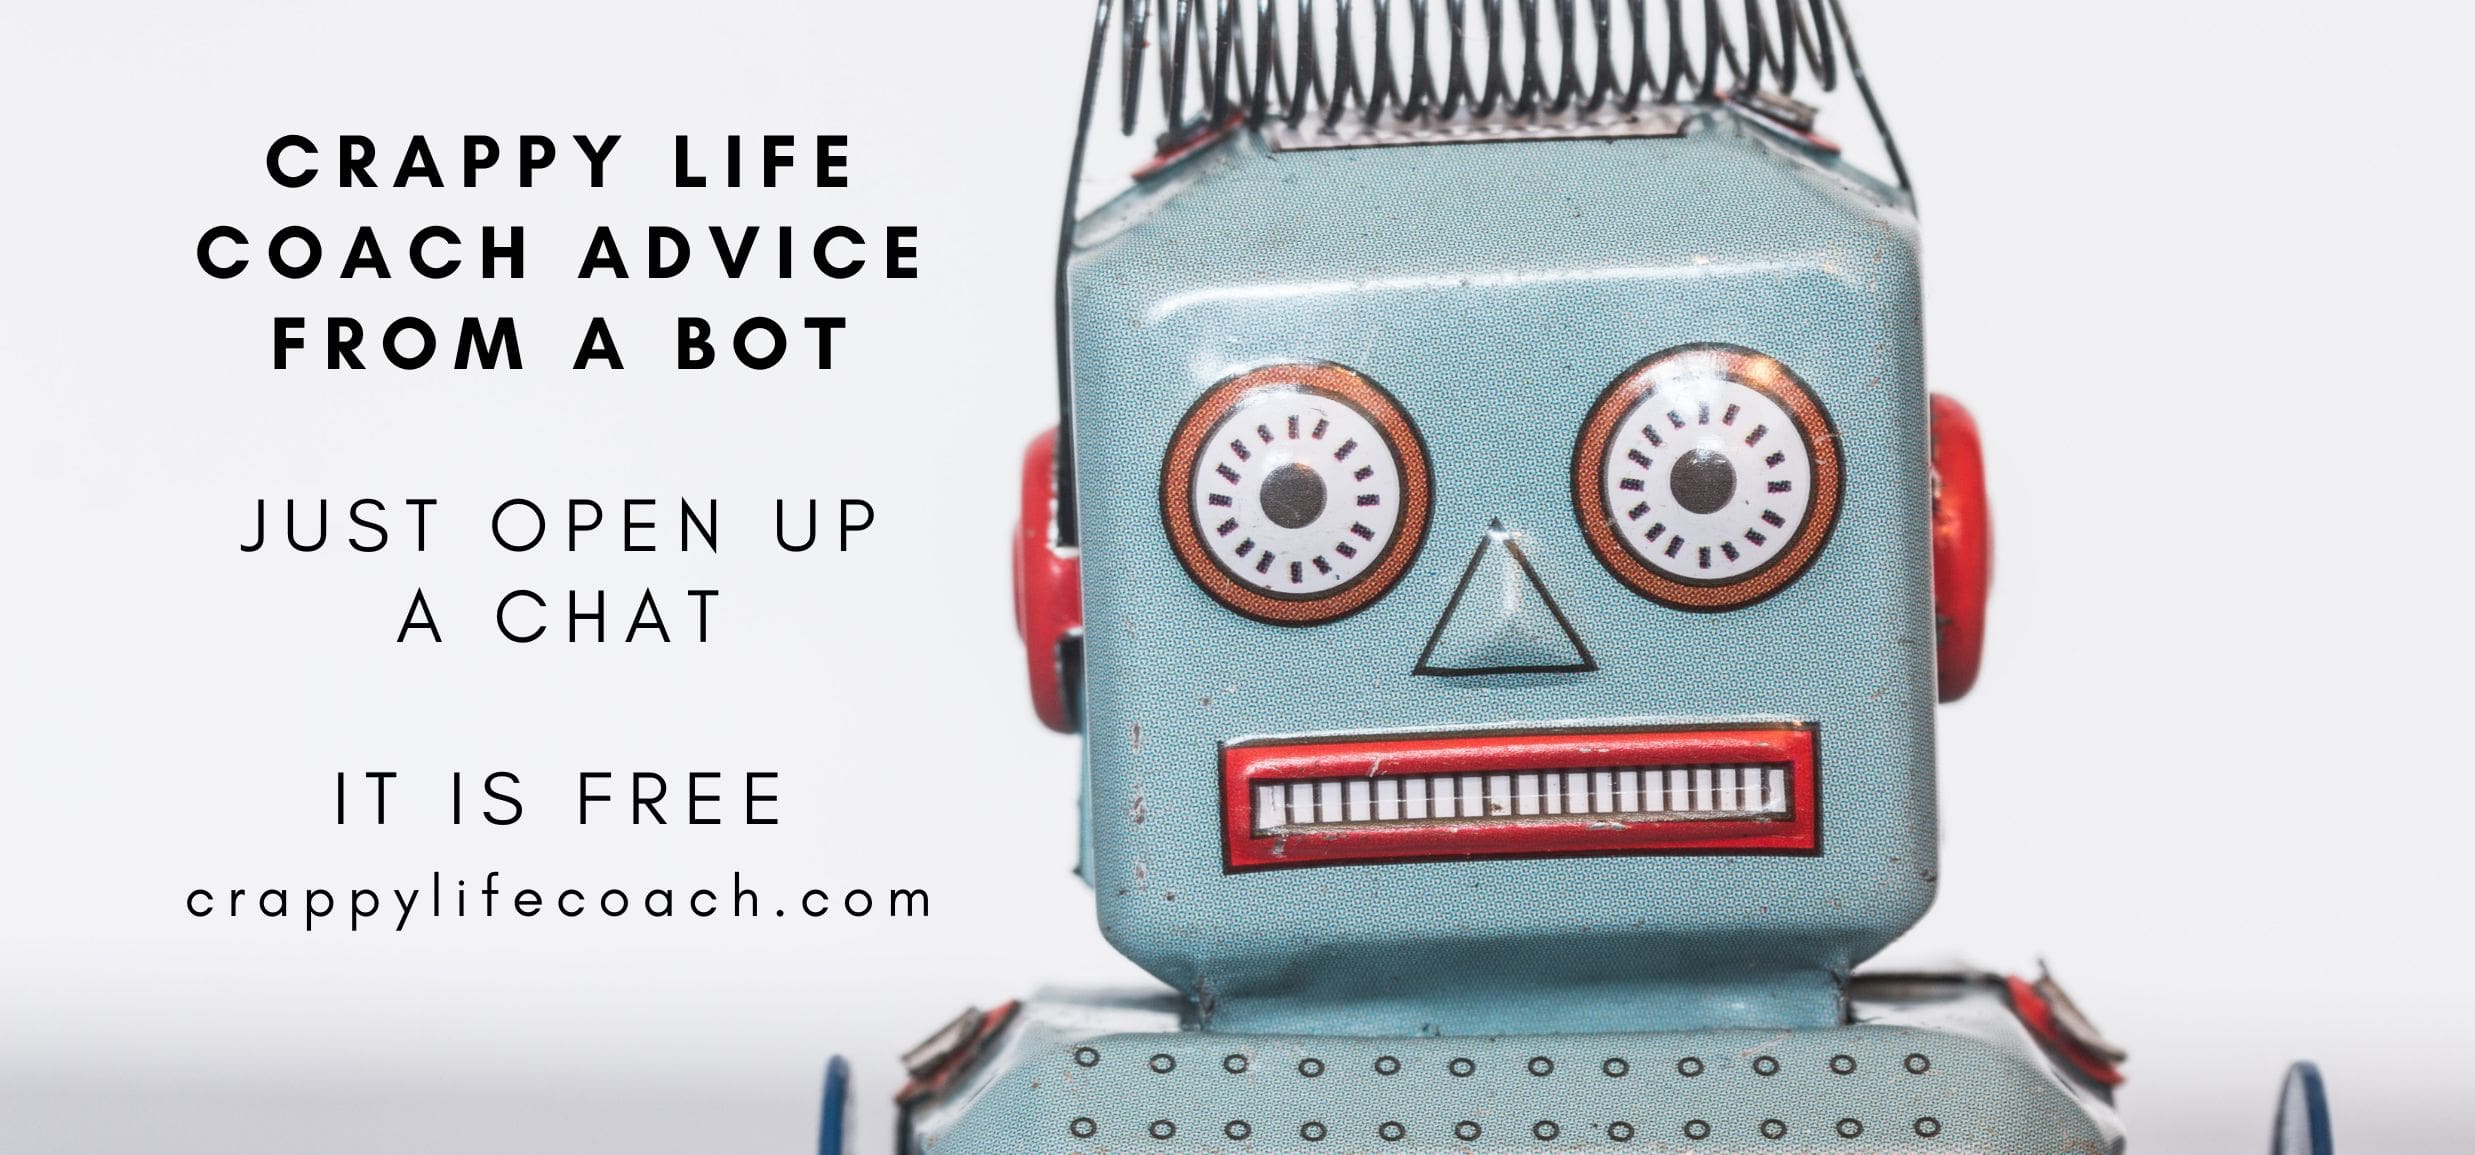 Crappy Life Coach Advice from a Bot – For Free!